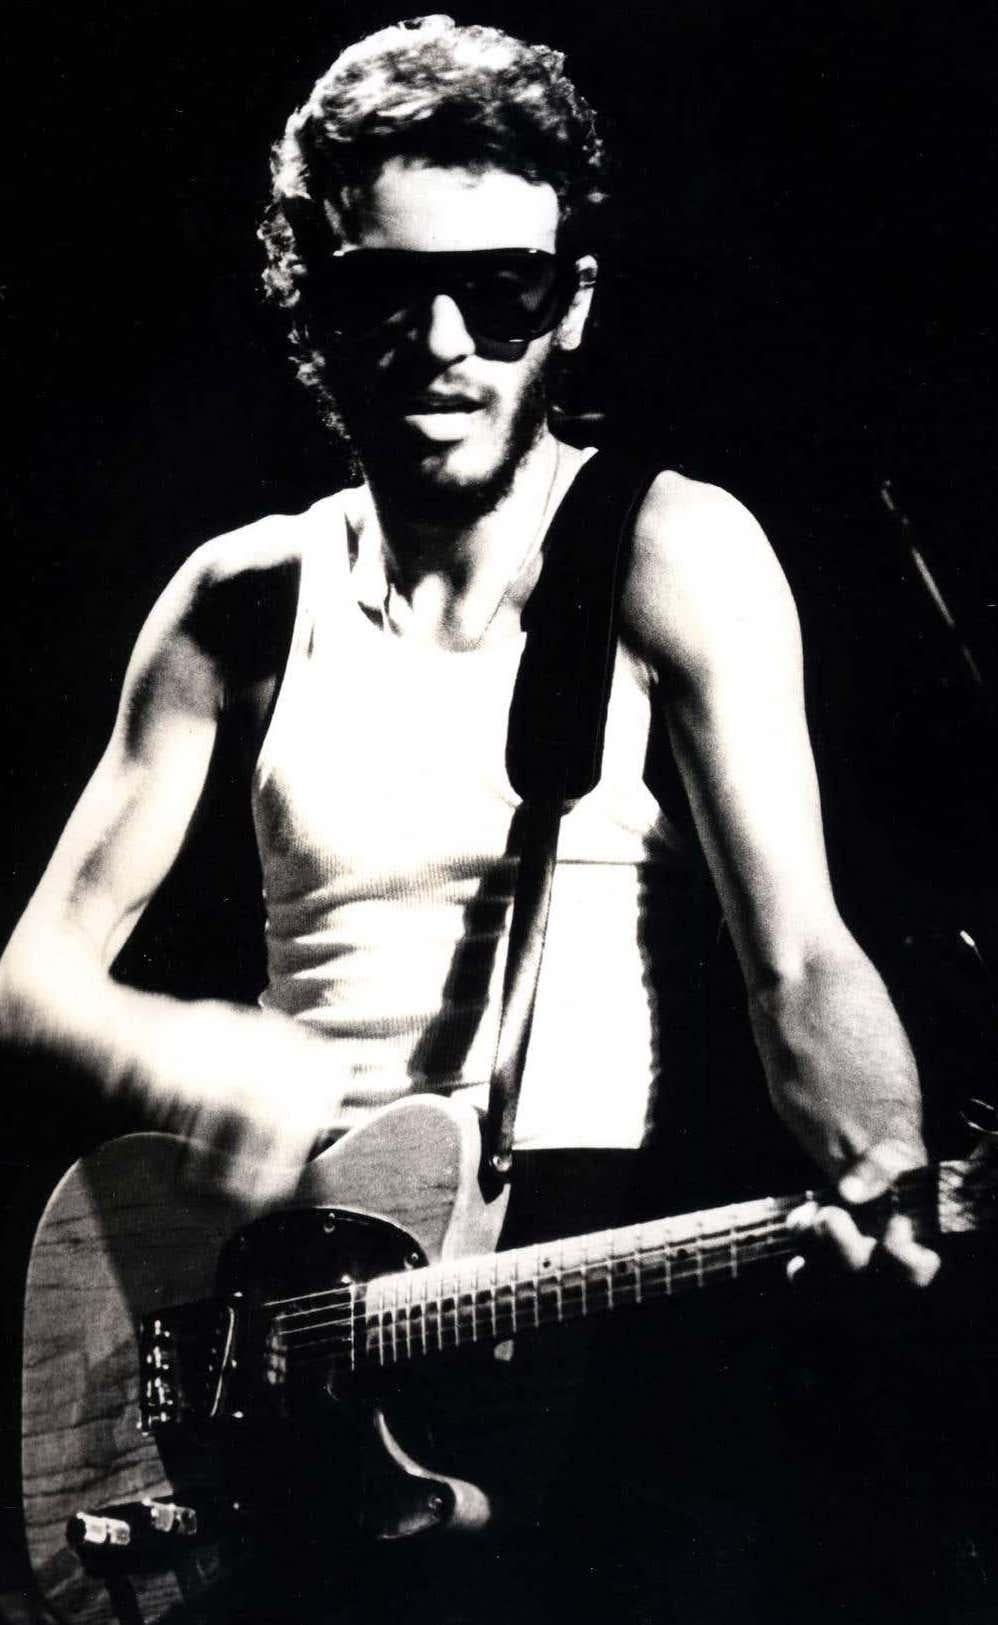 Bruce Springsteen photograph (the Bottom Line NYC 1975) - Photograph by Fernando Natalici